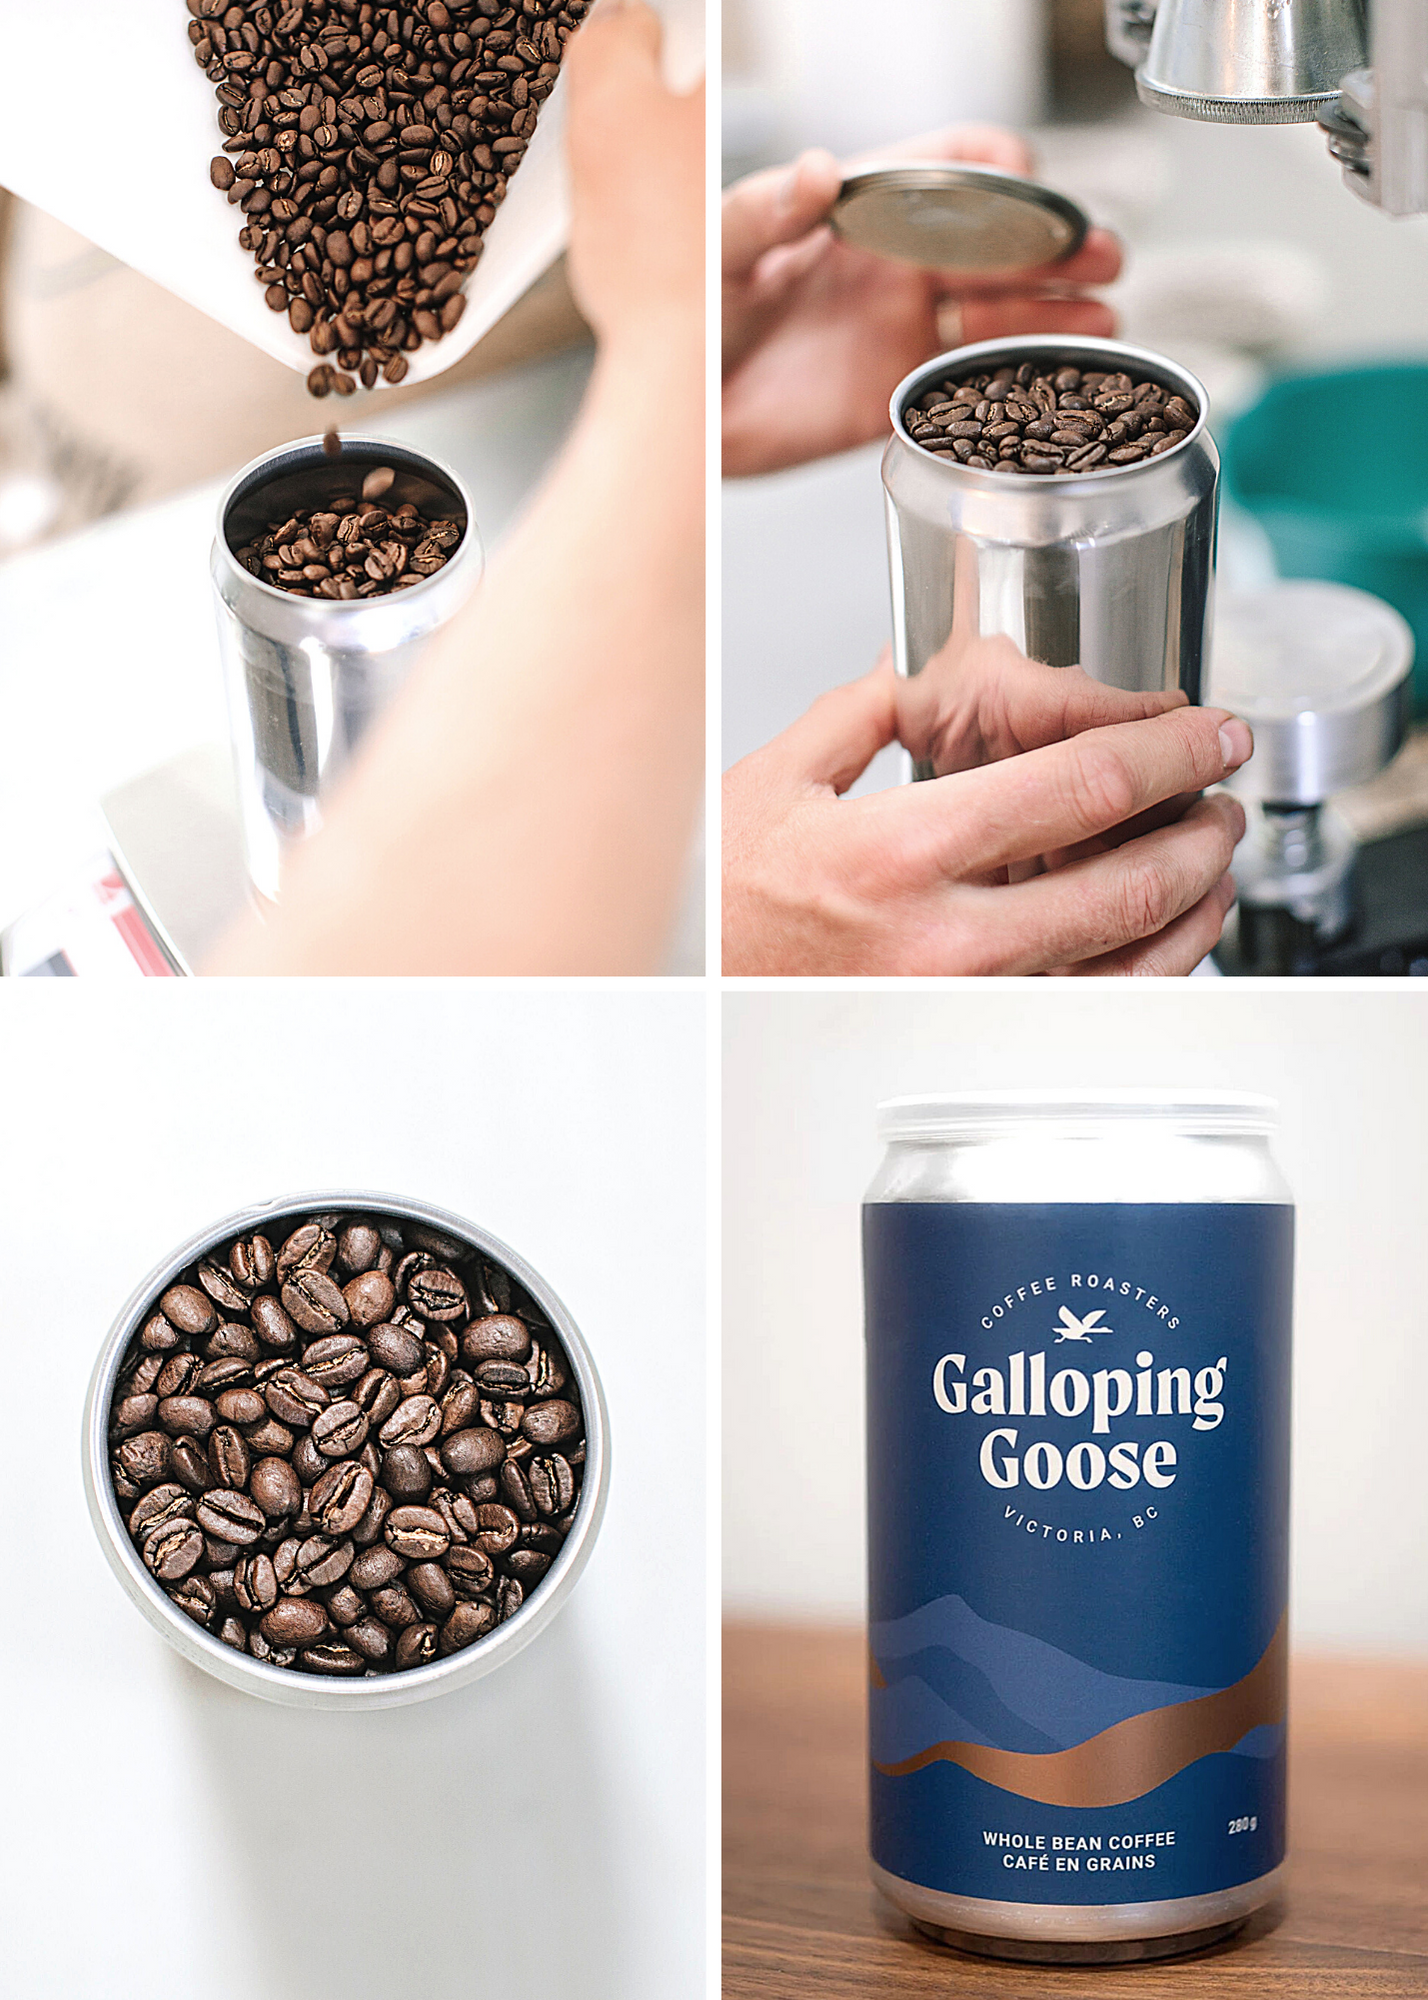 Four images in a grid displaying the process of adding coffee beans to the aluminum can packaging.